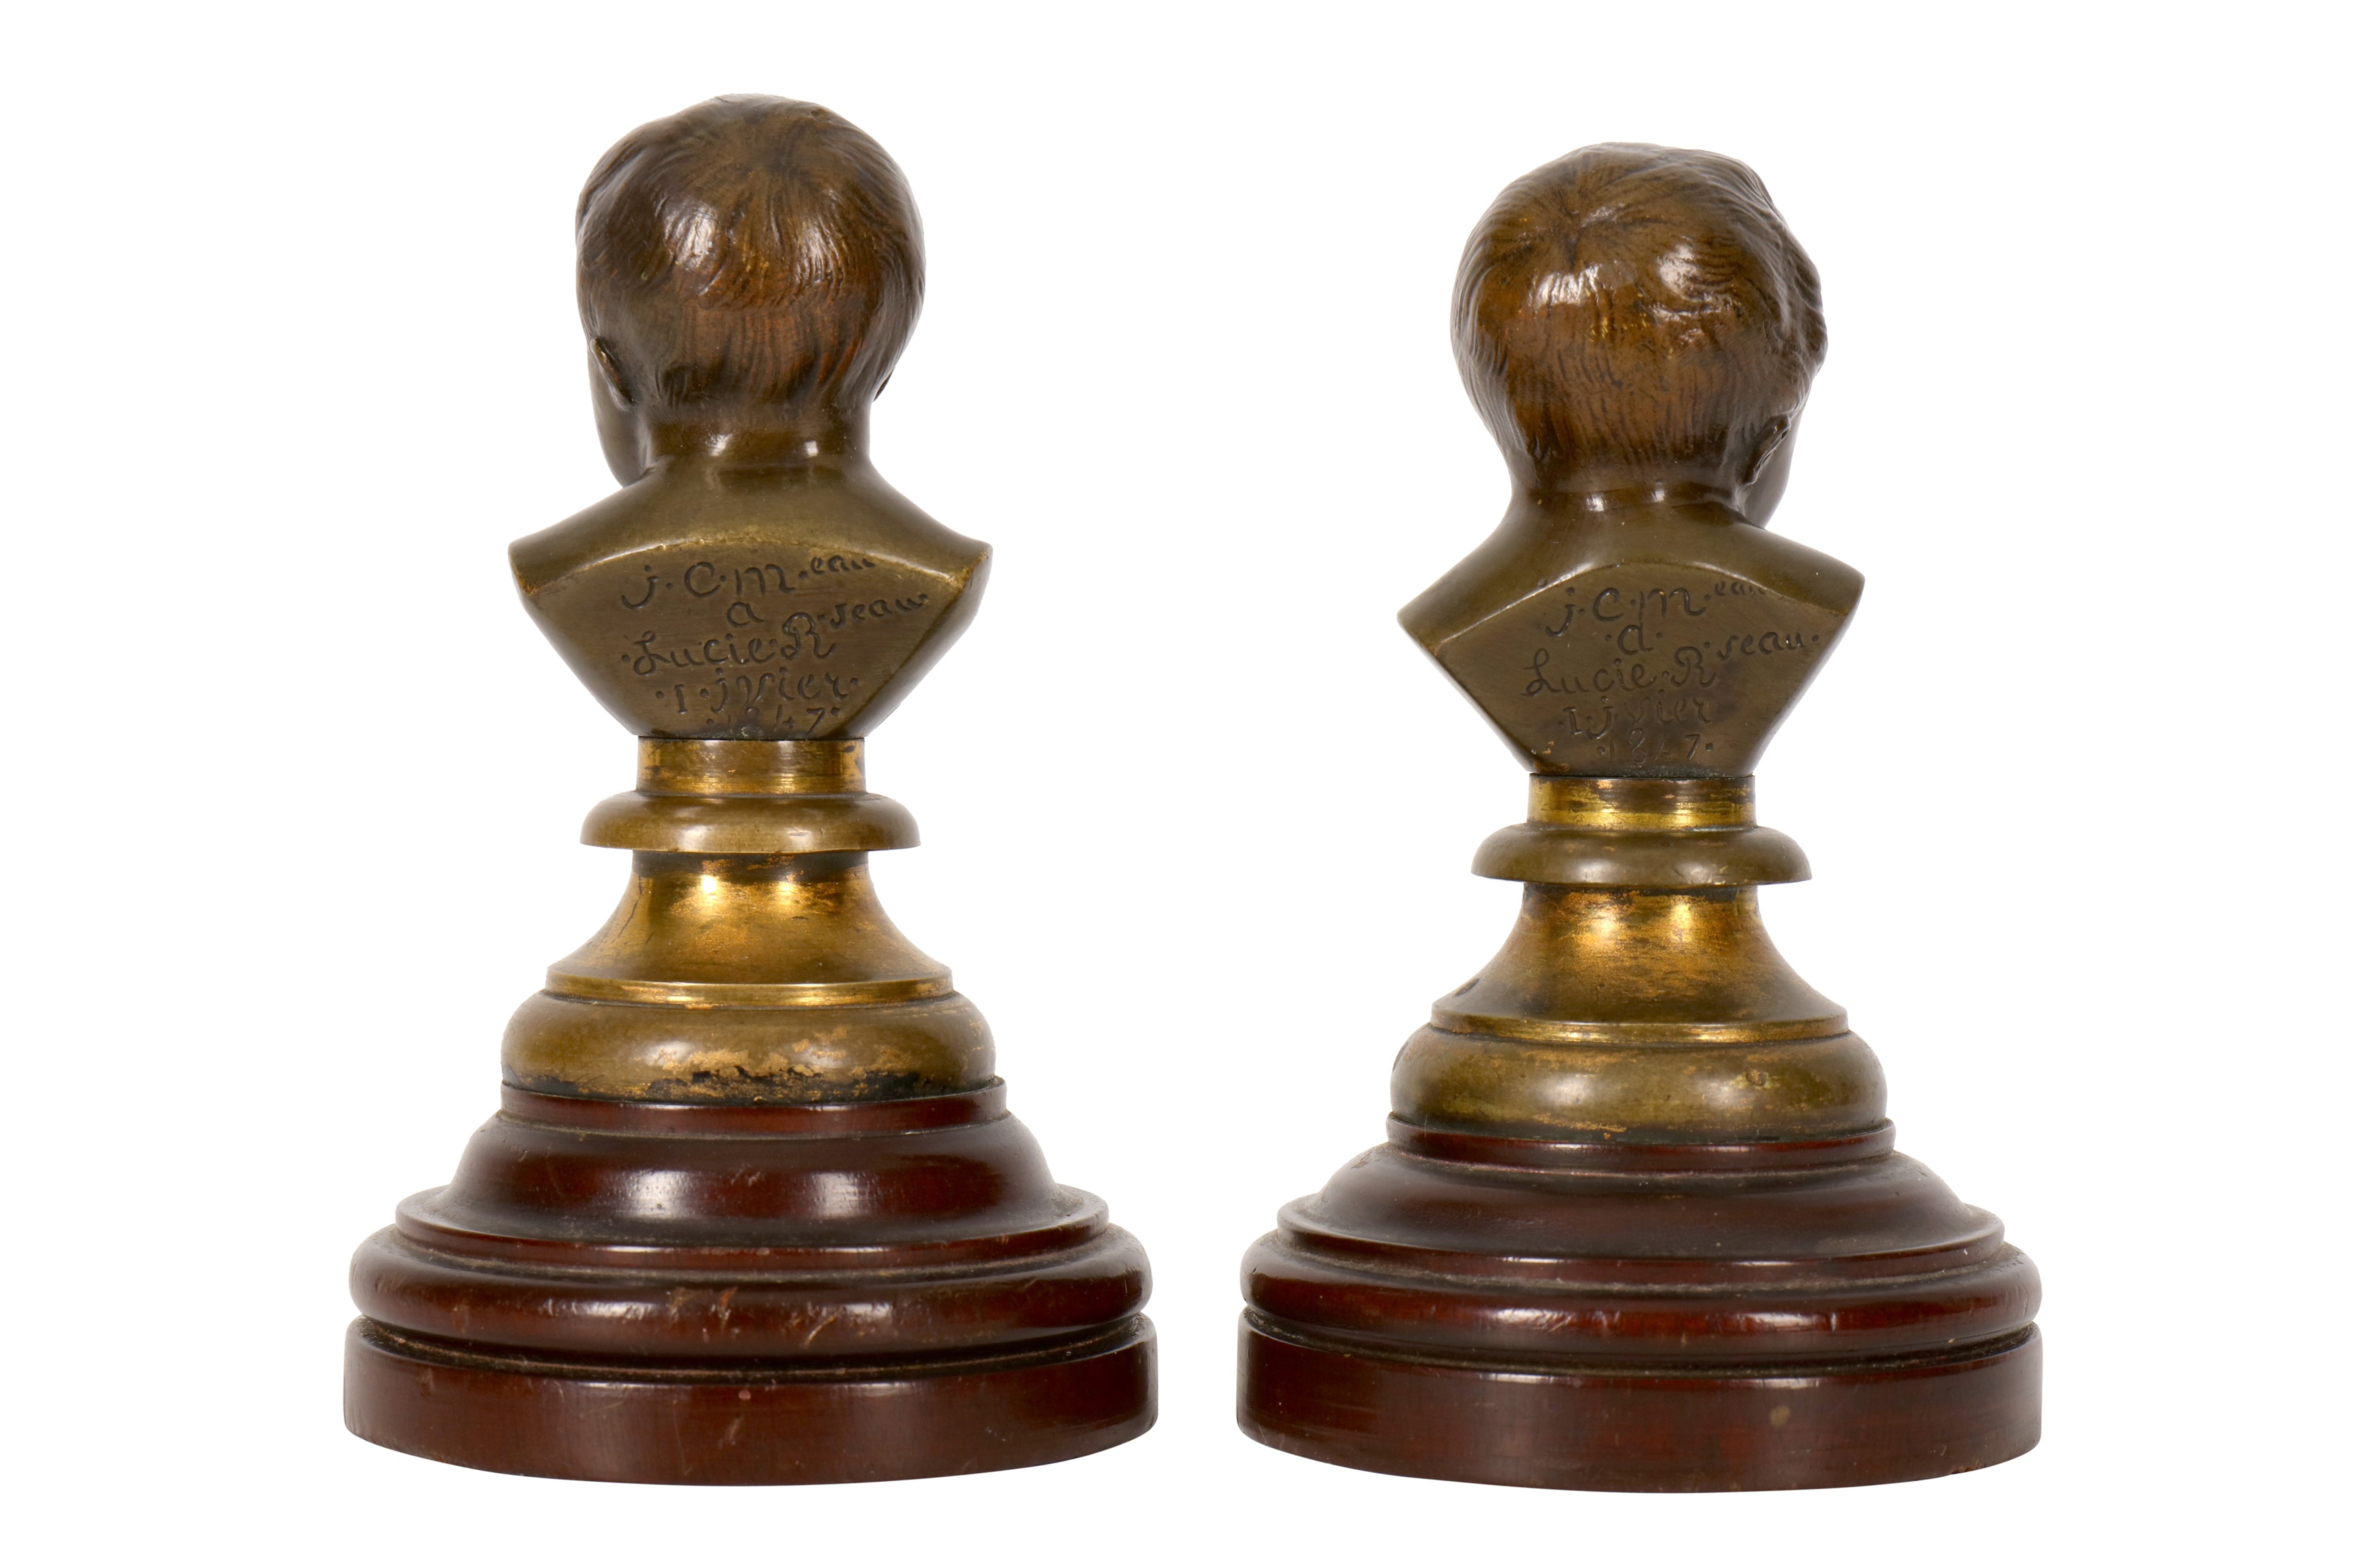 A PAIR OF FRENCH PATINATED BRONZE MINIATURE BUSTS OF INFANTS, LATE 19TH TO EARLY 20TH CENTURY - Image 2 of 4